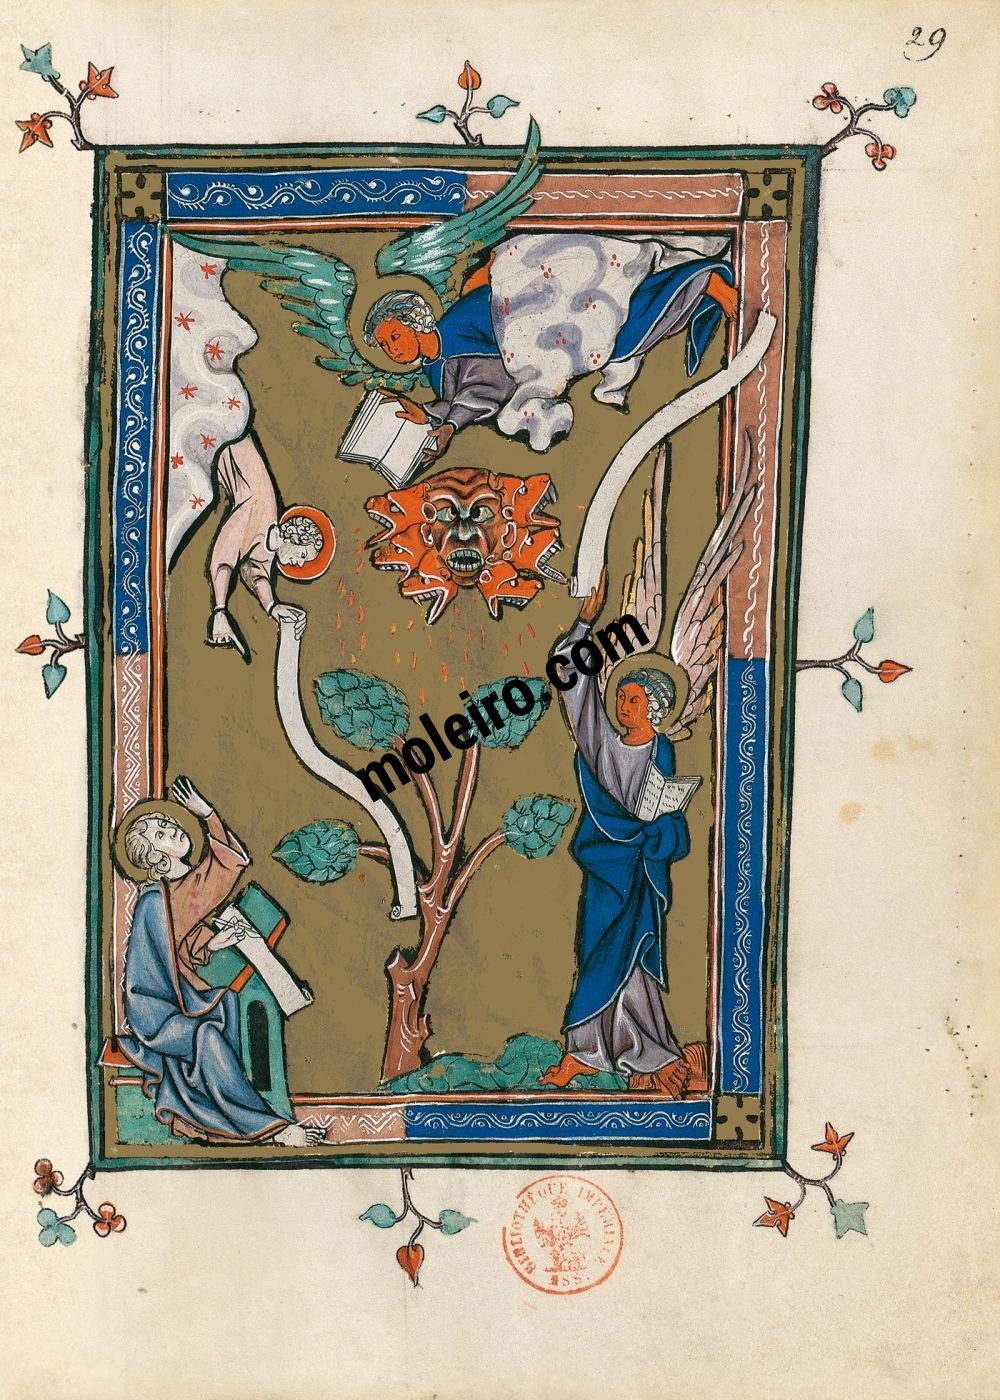 Apocalisse 1313 f. 29r